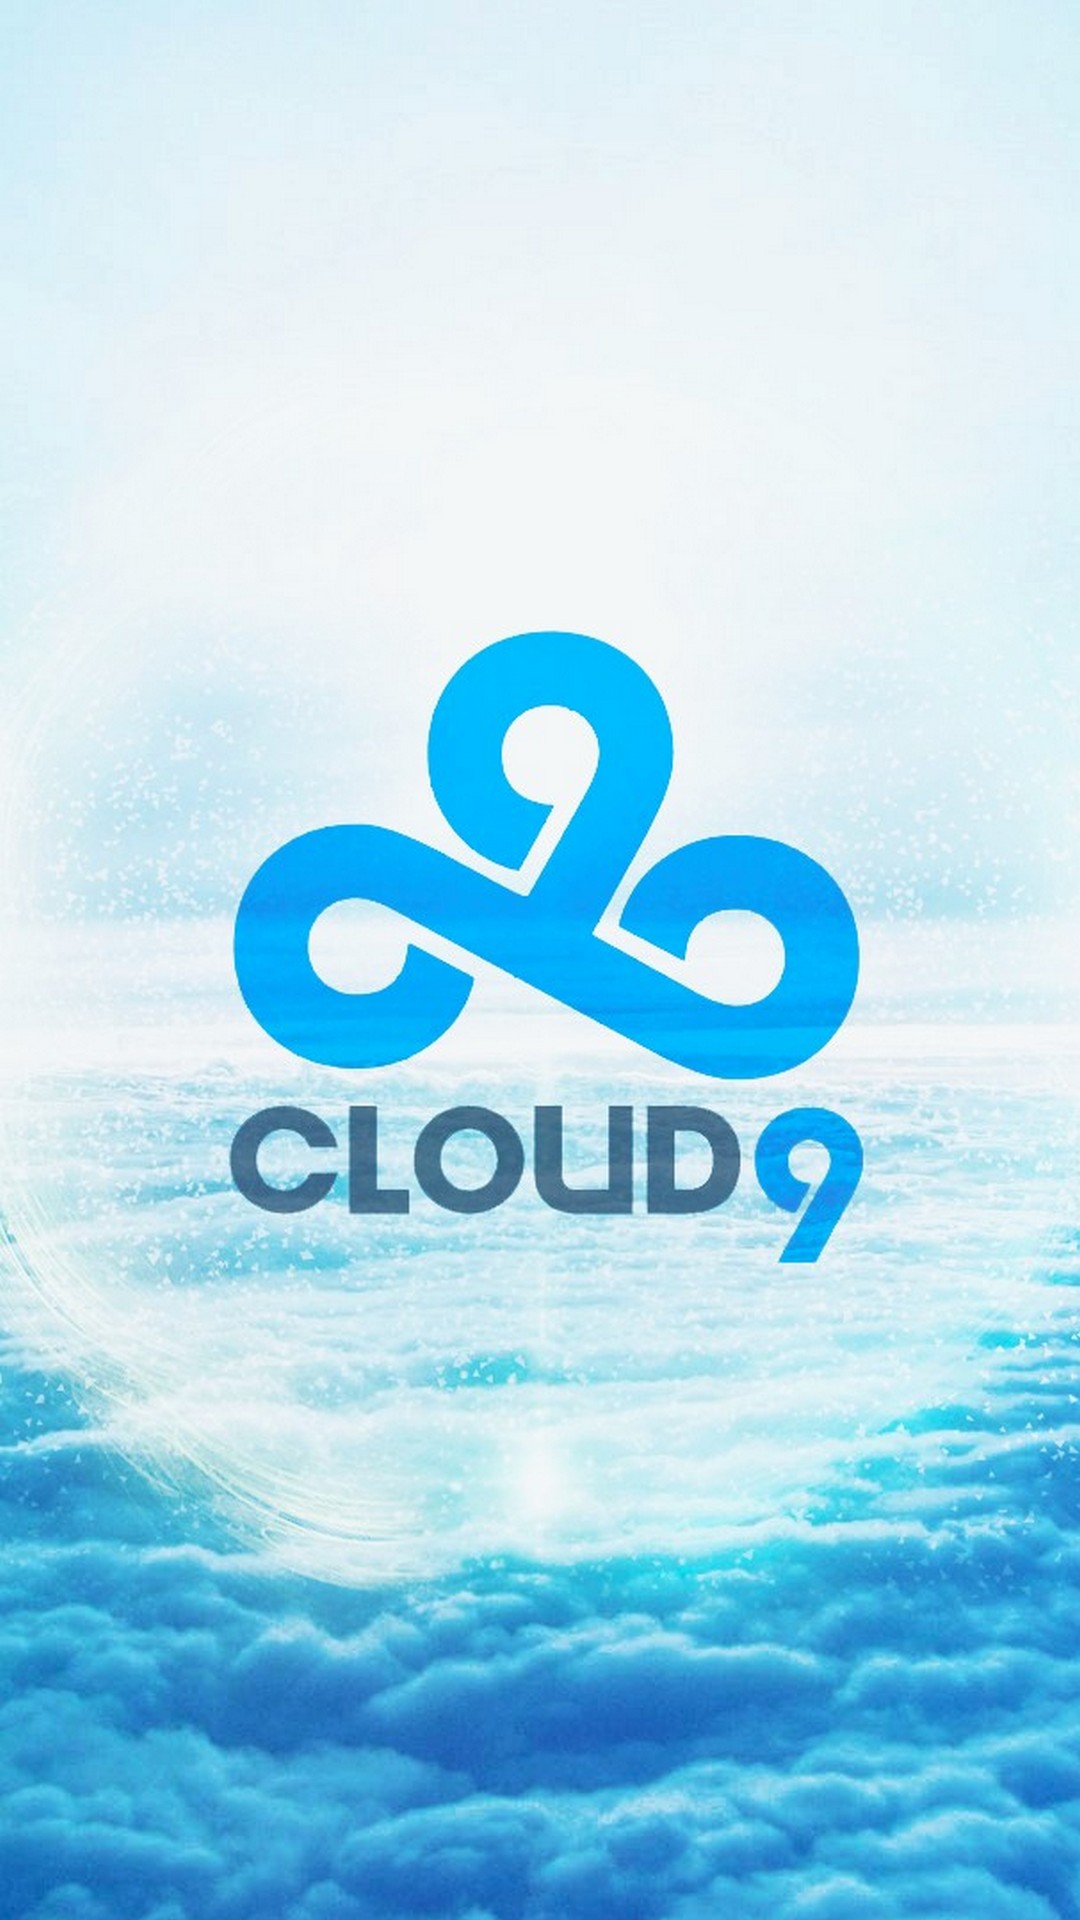 Cloud 9 Wallpaper iPhone with HD Resolution 1080X1920